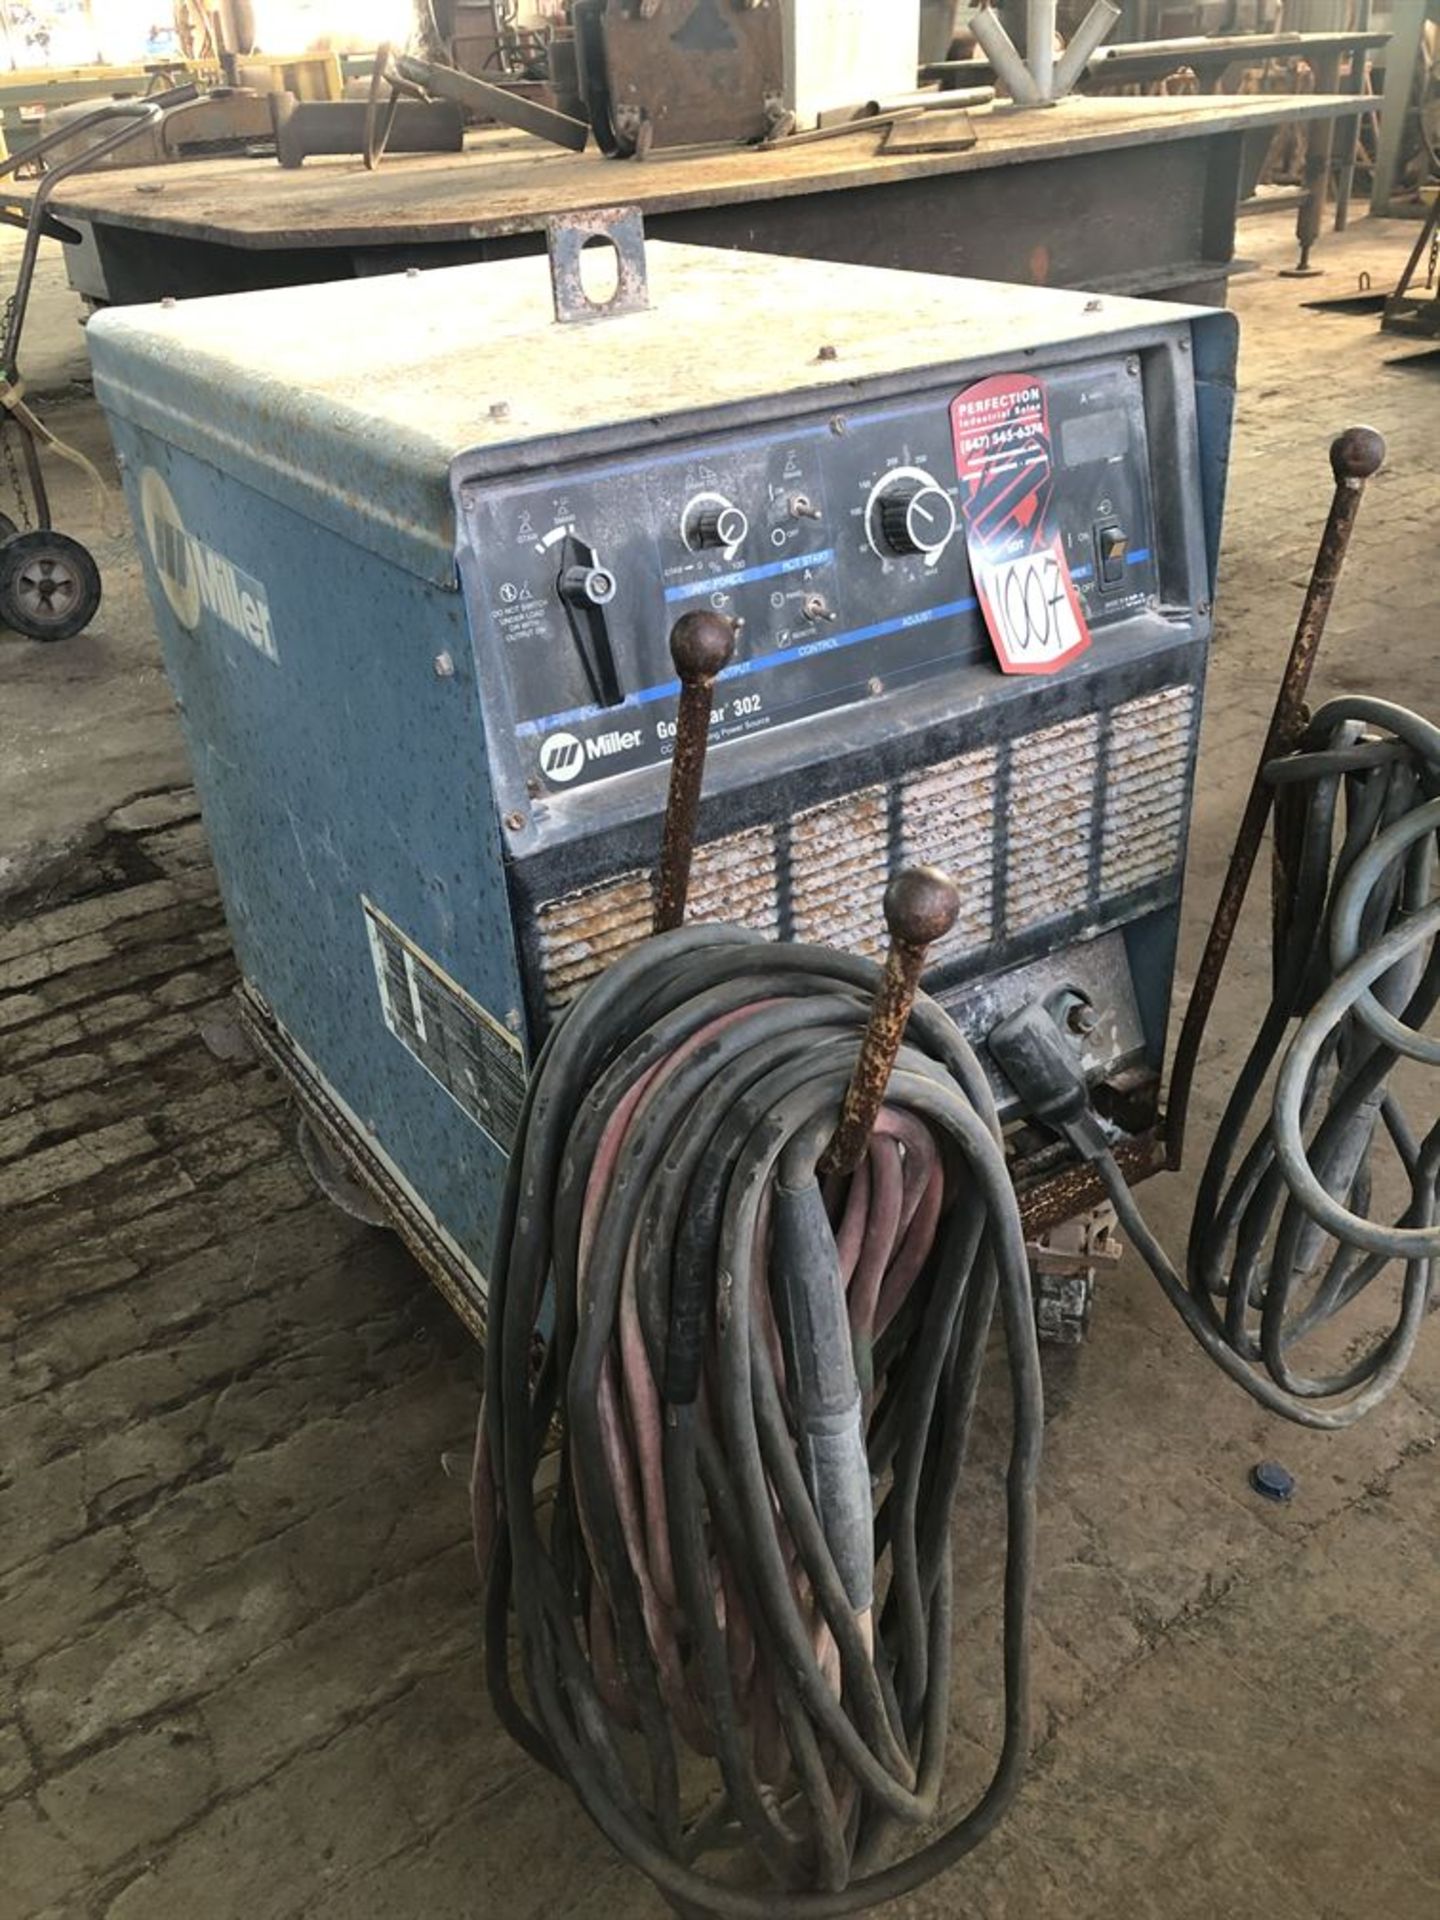 Miller Gold Star 302 CC.DC Arc Welding Power Source, s/n LF122858 (Location: Learning Center)